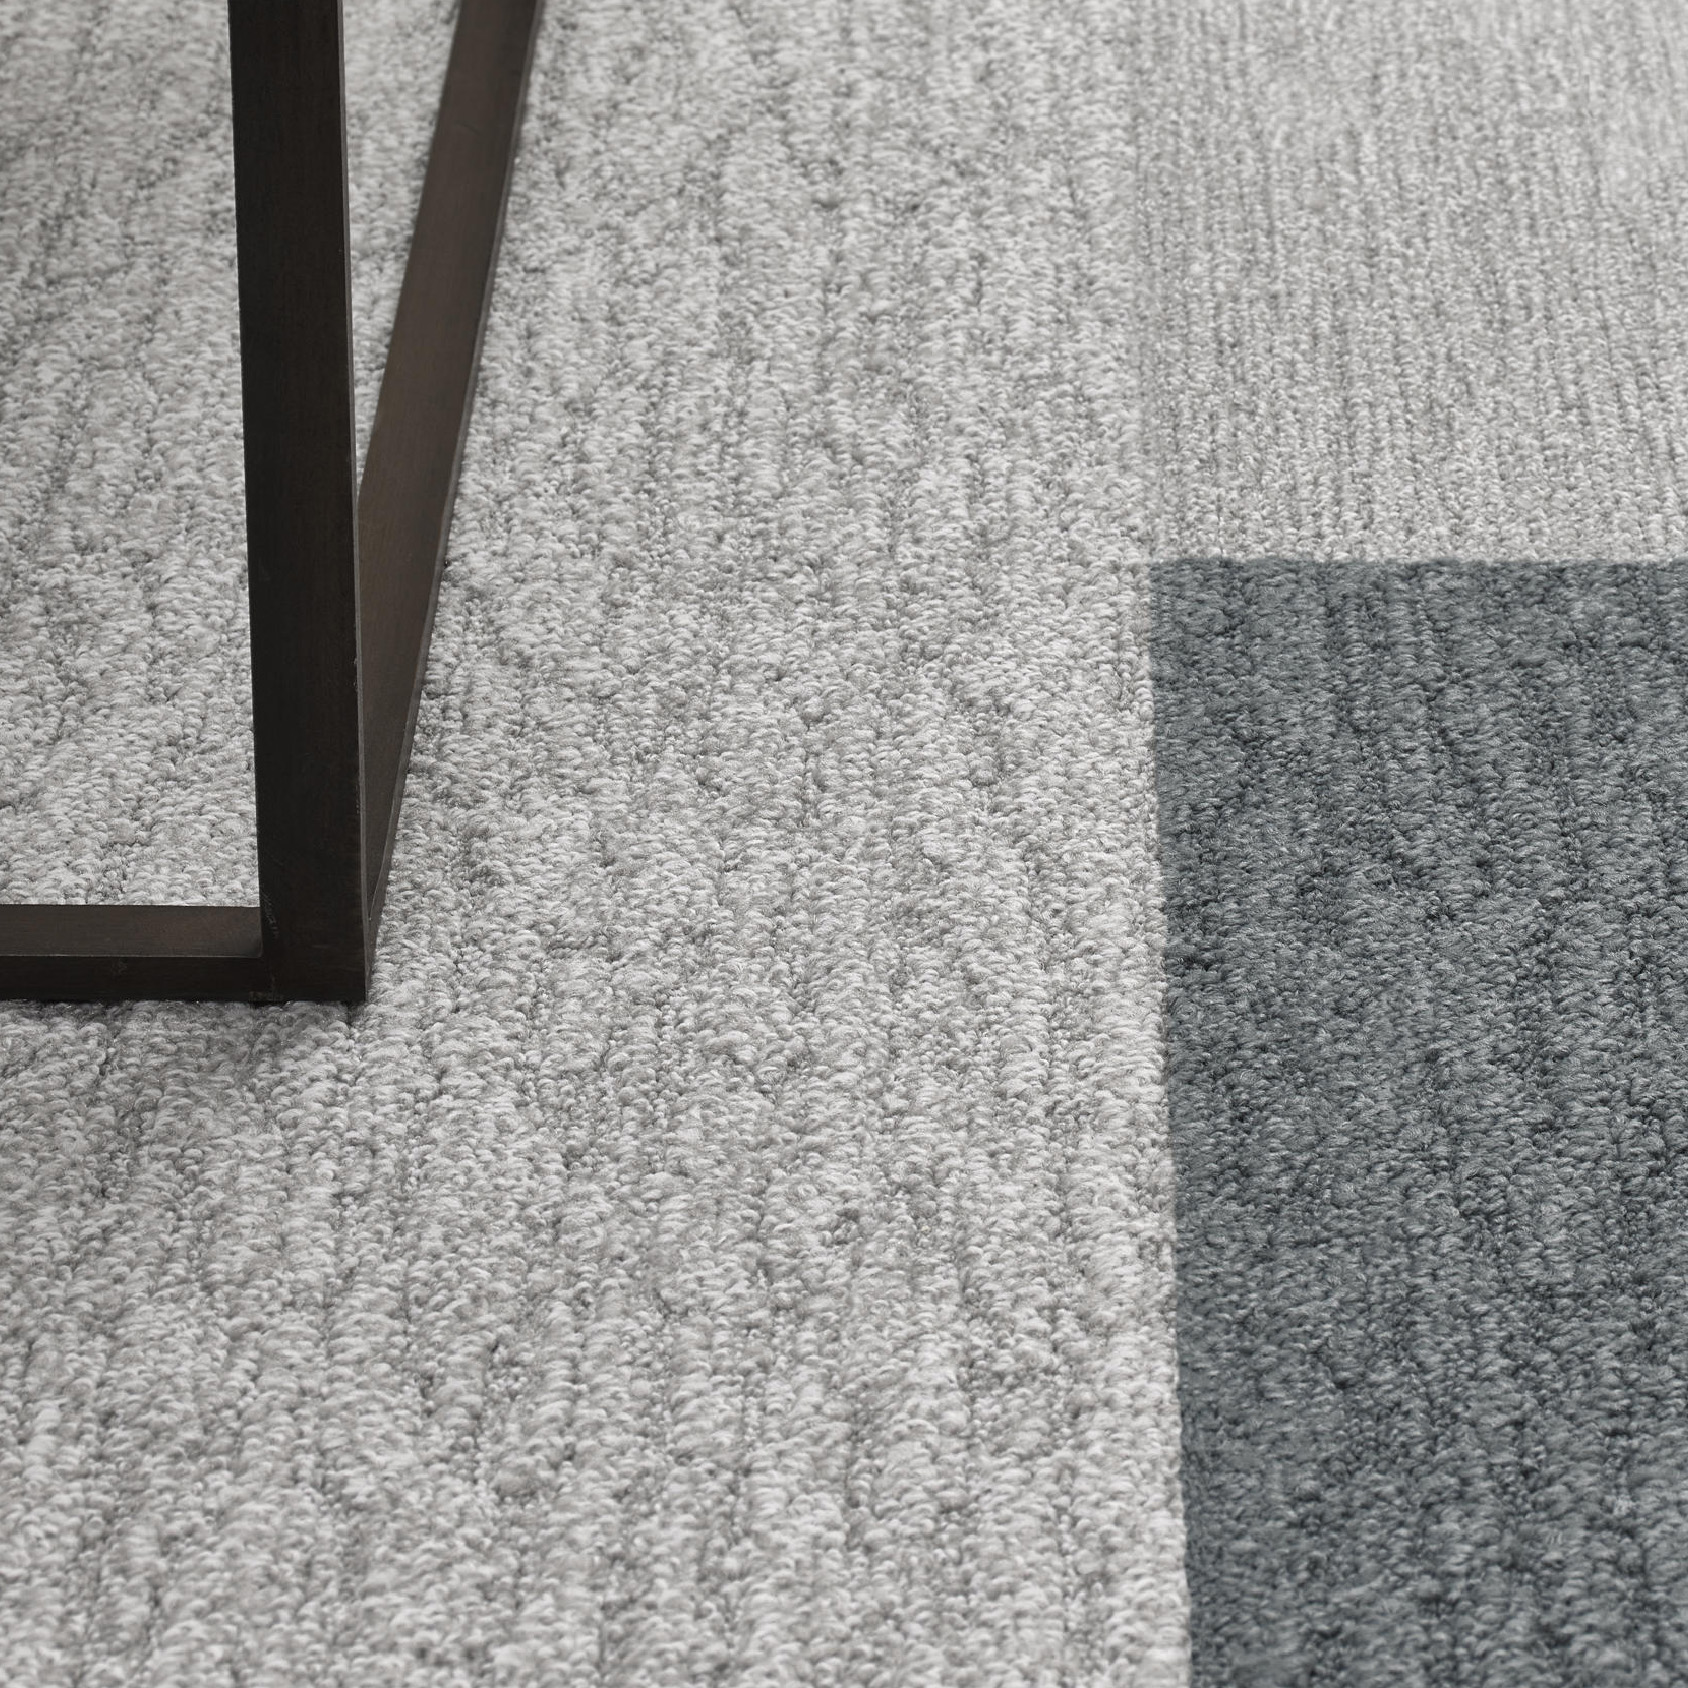 Desso Carved Carpet Tile in an office setting 3